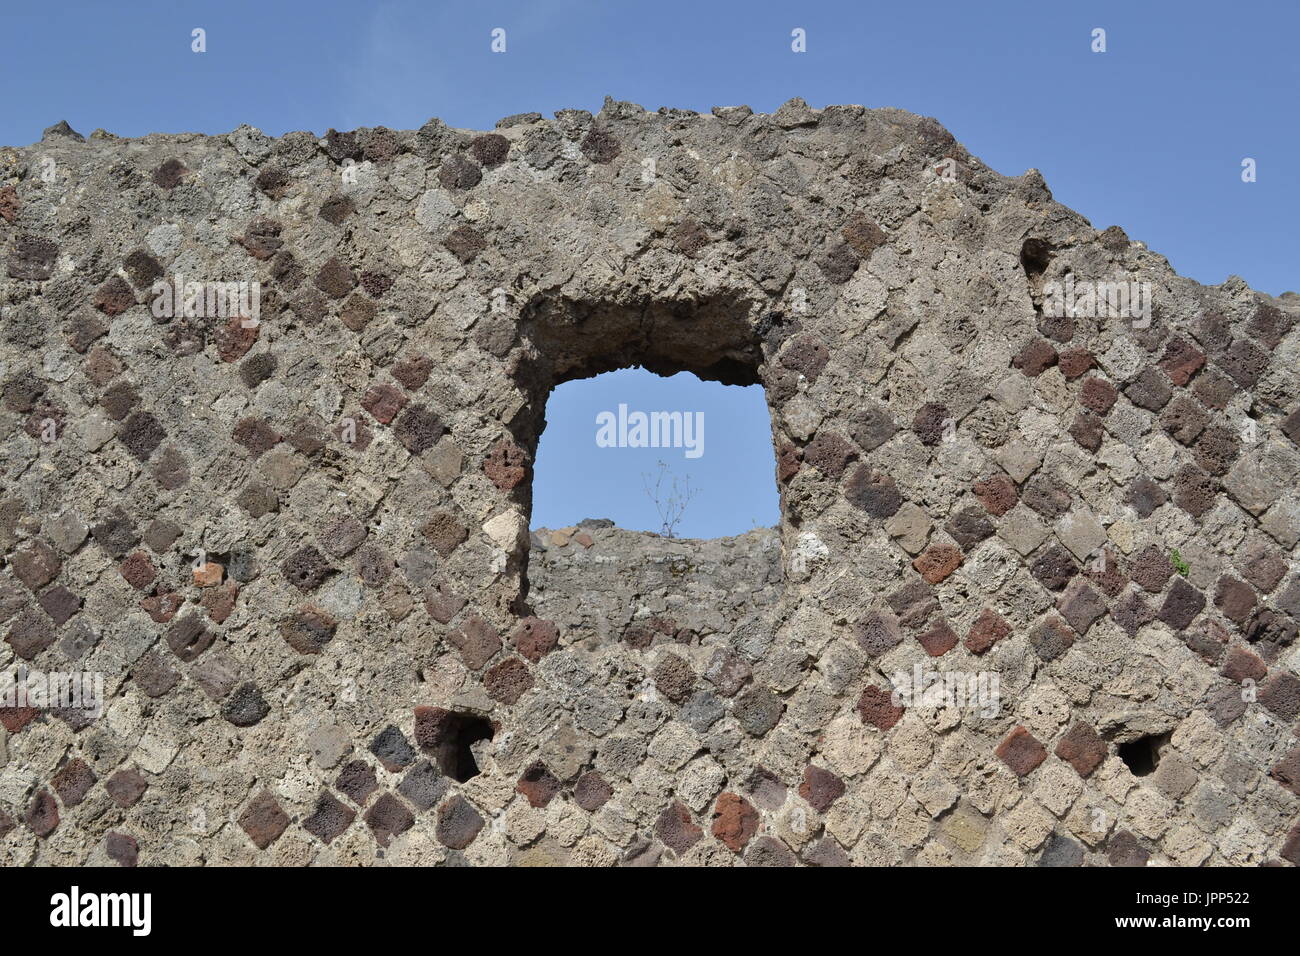 Different view of Pompeii, Italy - Life between the rocks Stock Photo